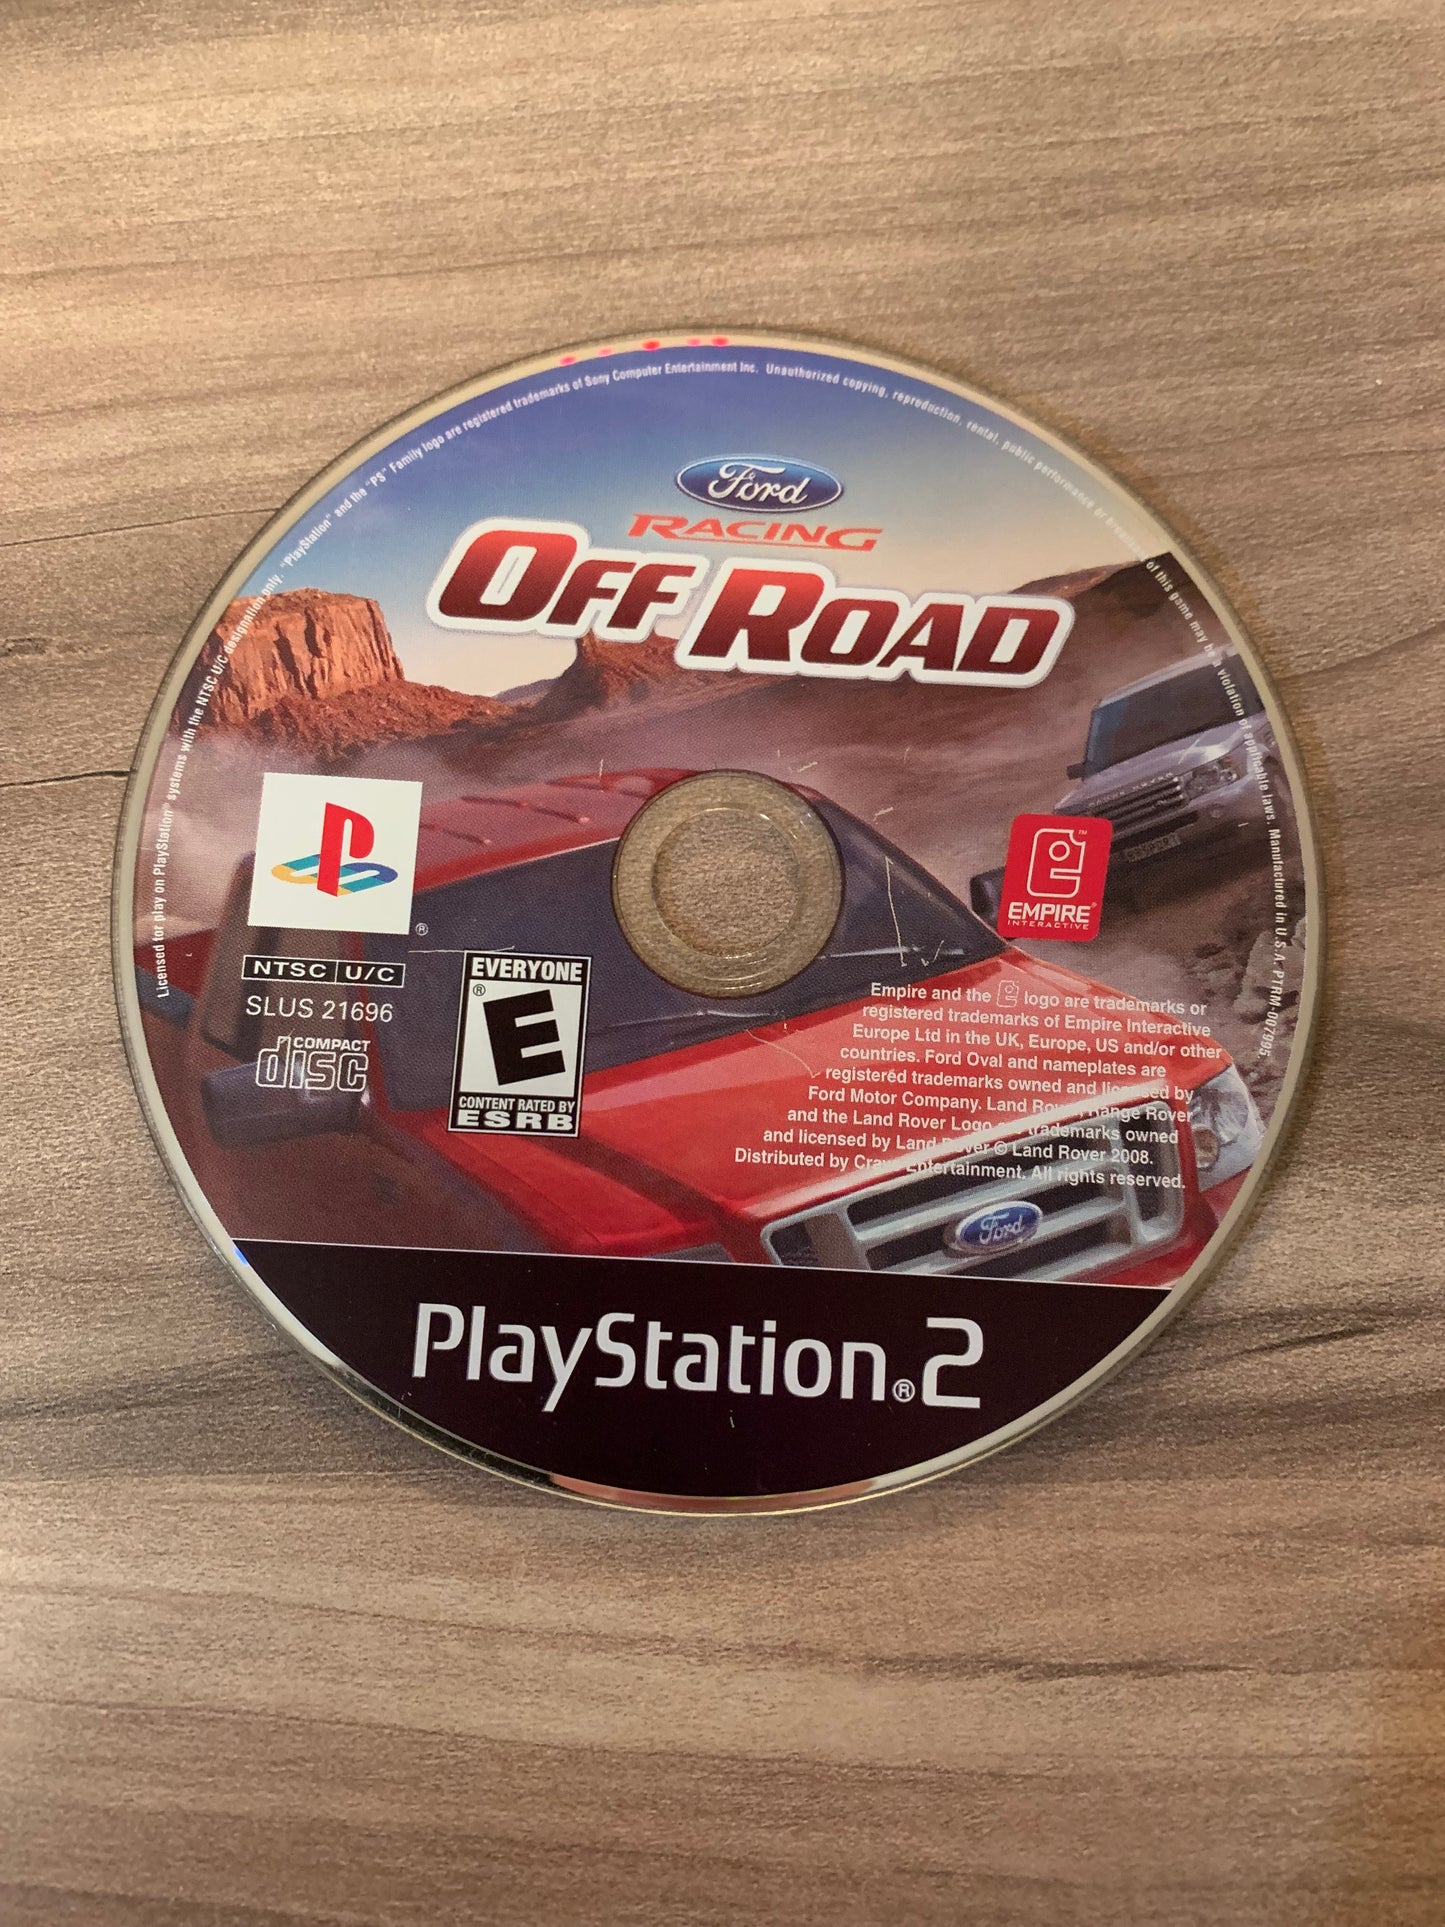 PiXEL-RETRO.COM : SONY PLAYSTATION 2 (PS2) GAME NTSC FORD RACING OFF ROAD